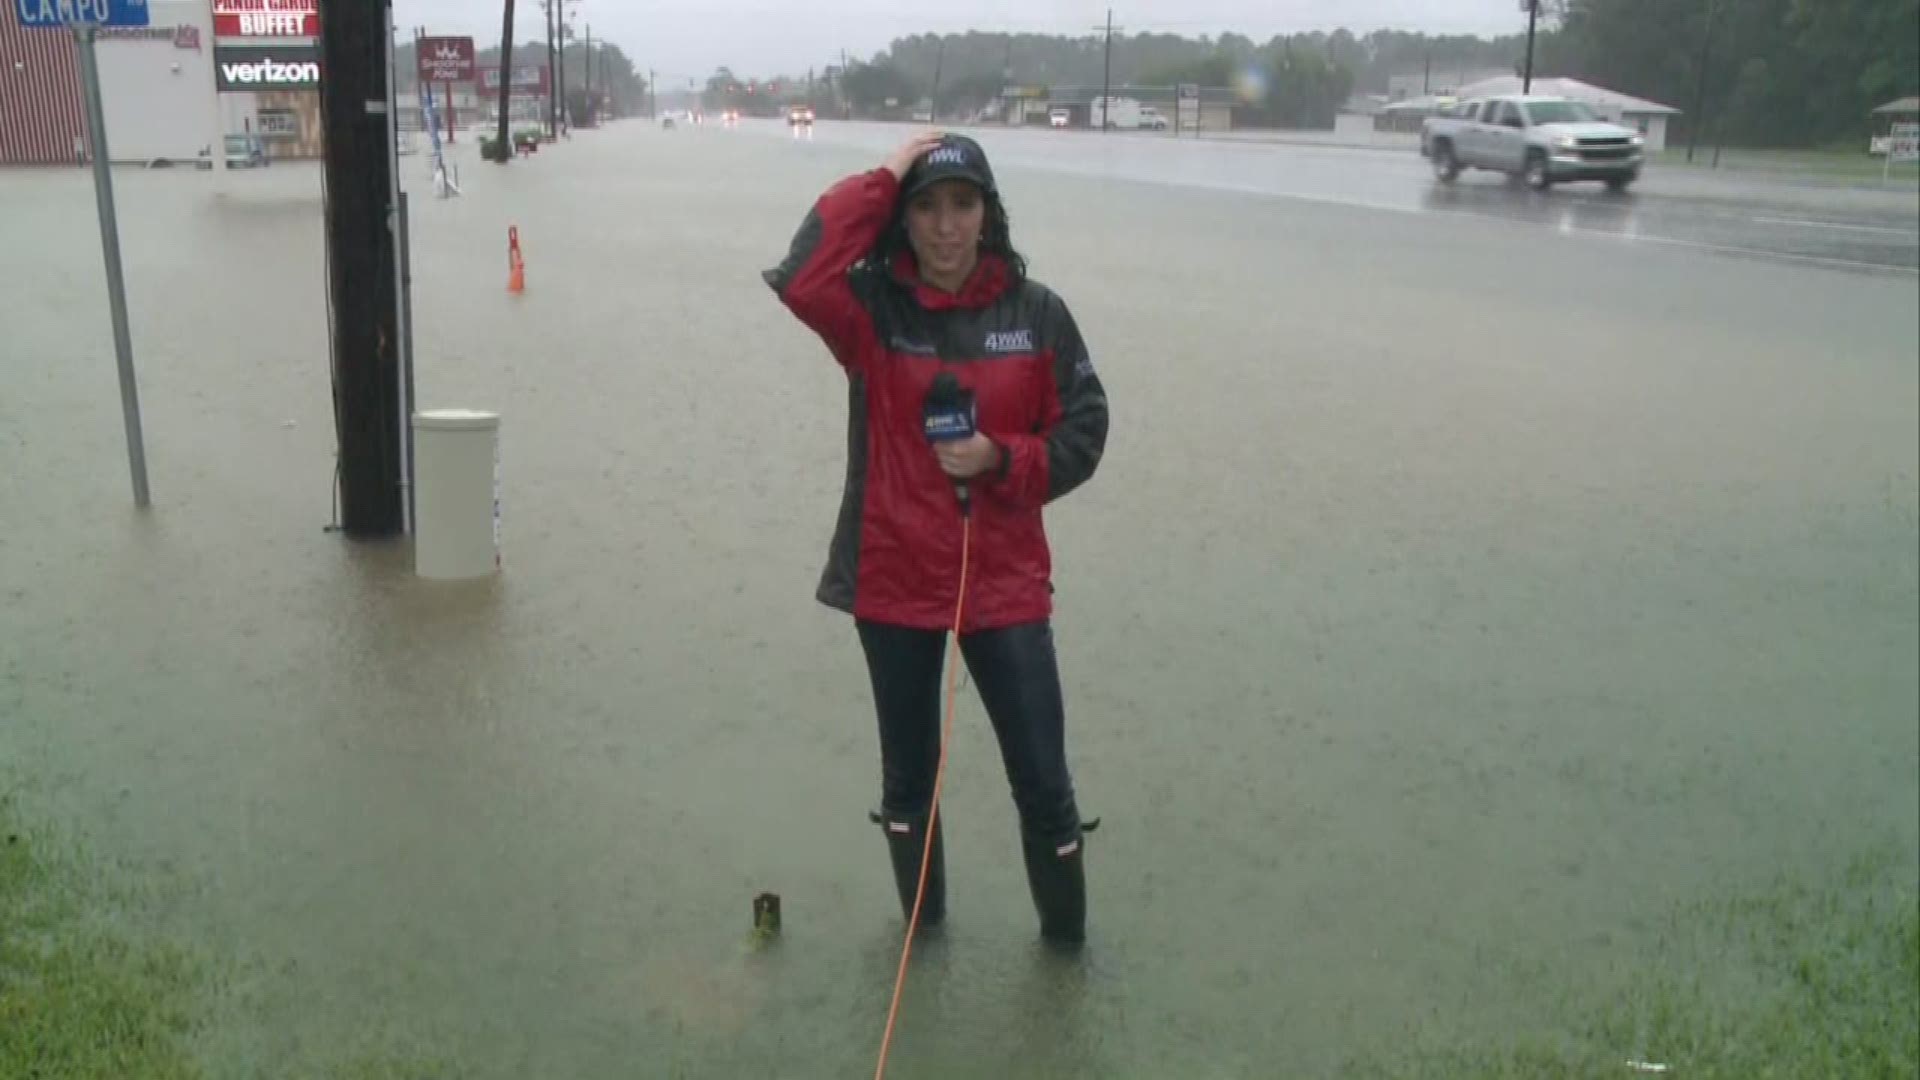 Lauren Bale reports from Amite at noon, where flood waters continue to rise.